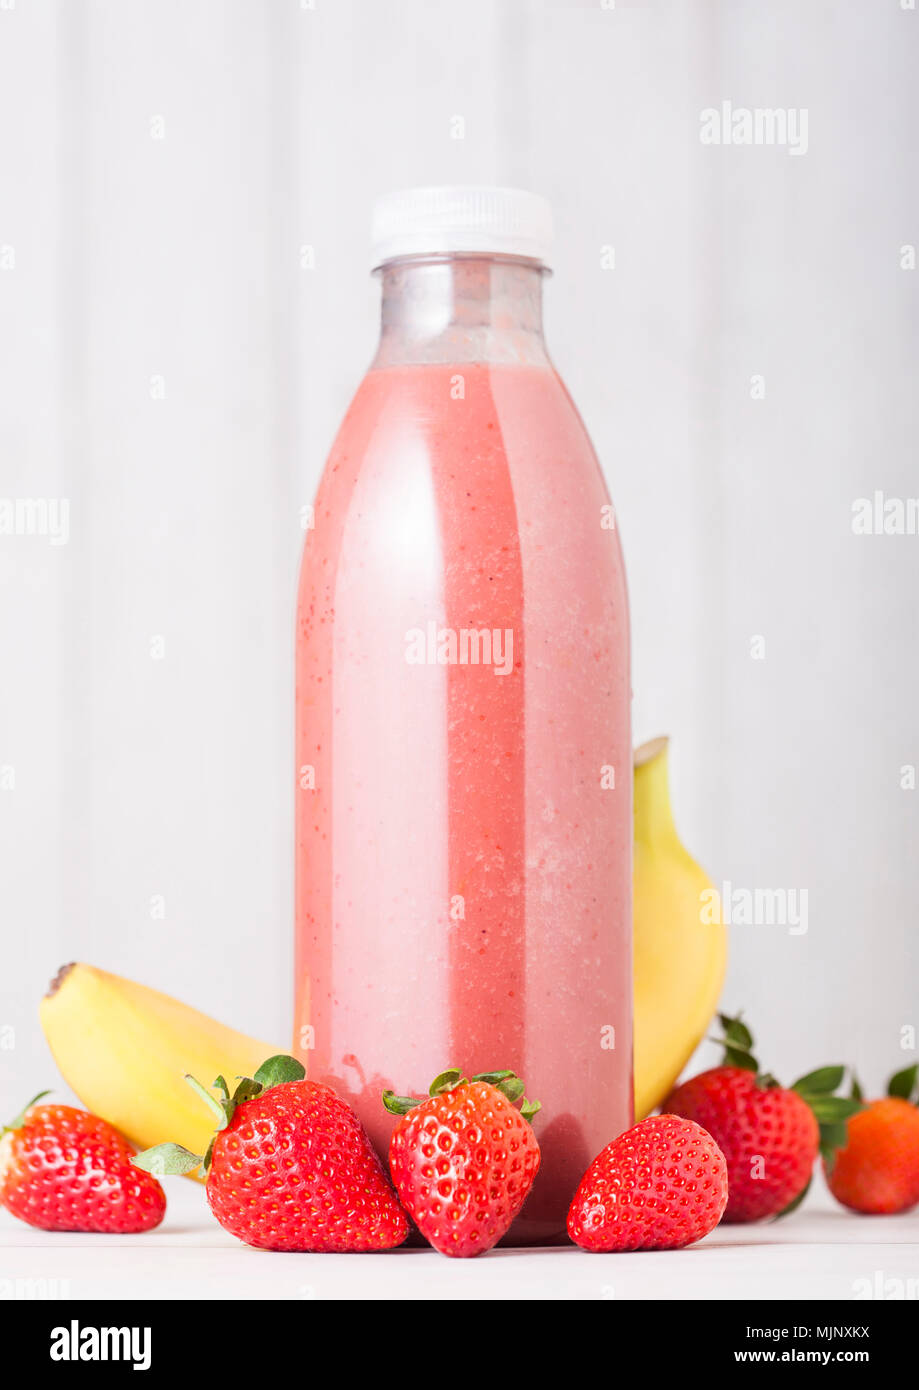 Plastic bottle with fresh summer berries smoothie on wooden background.Strwberry and banana flavour. Stock Photo